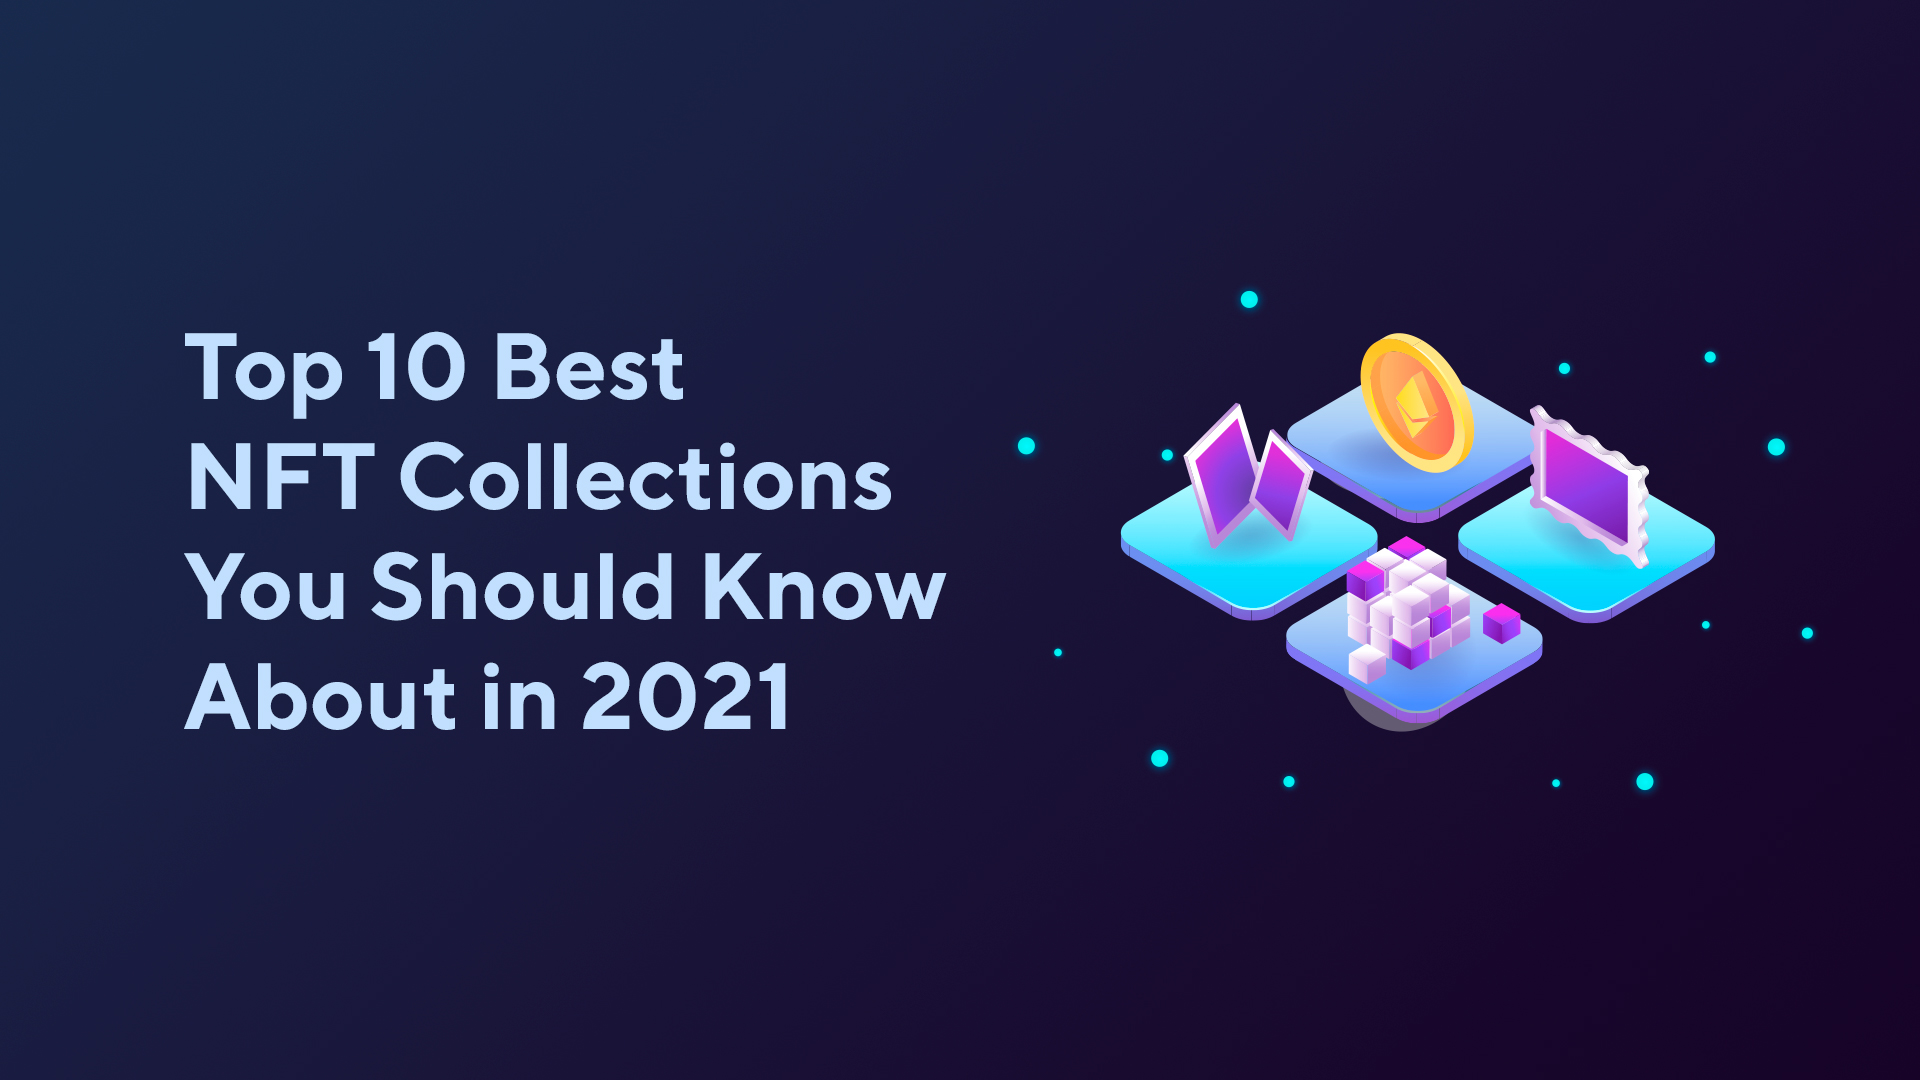 Top 10 Best NFT Collections You Should Know About in 2021